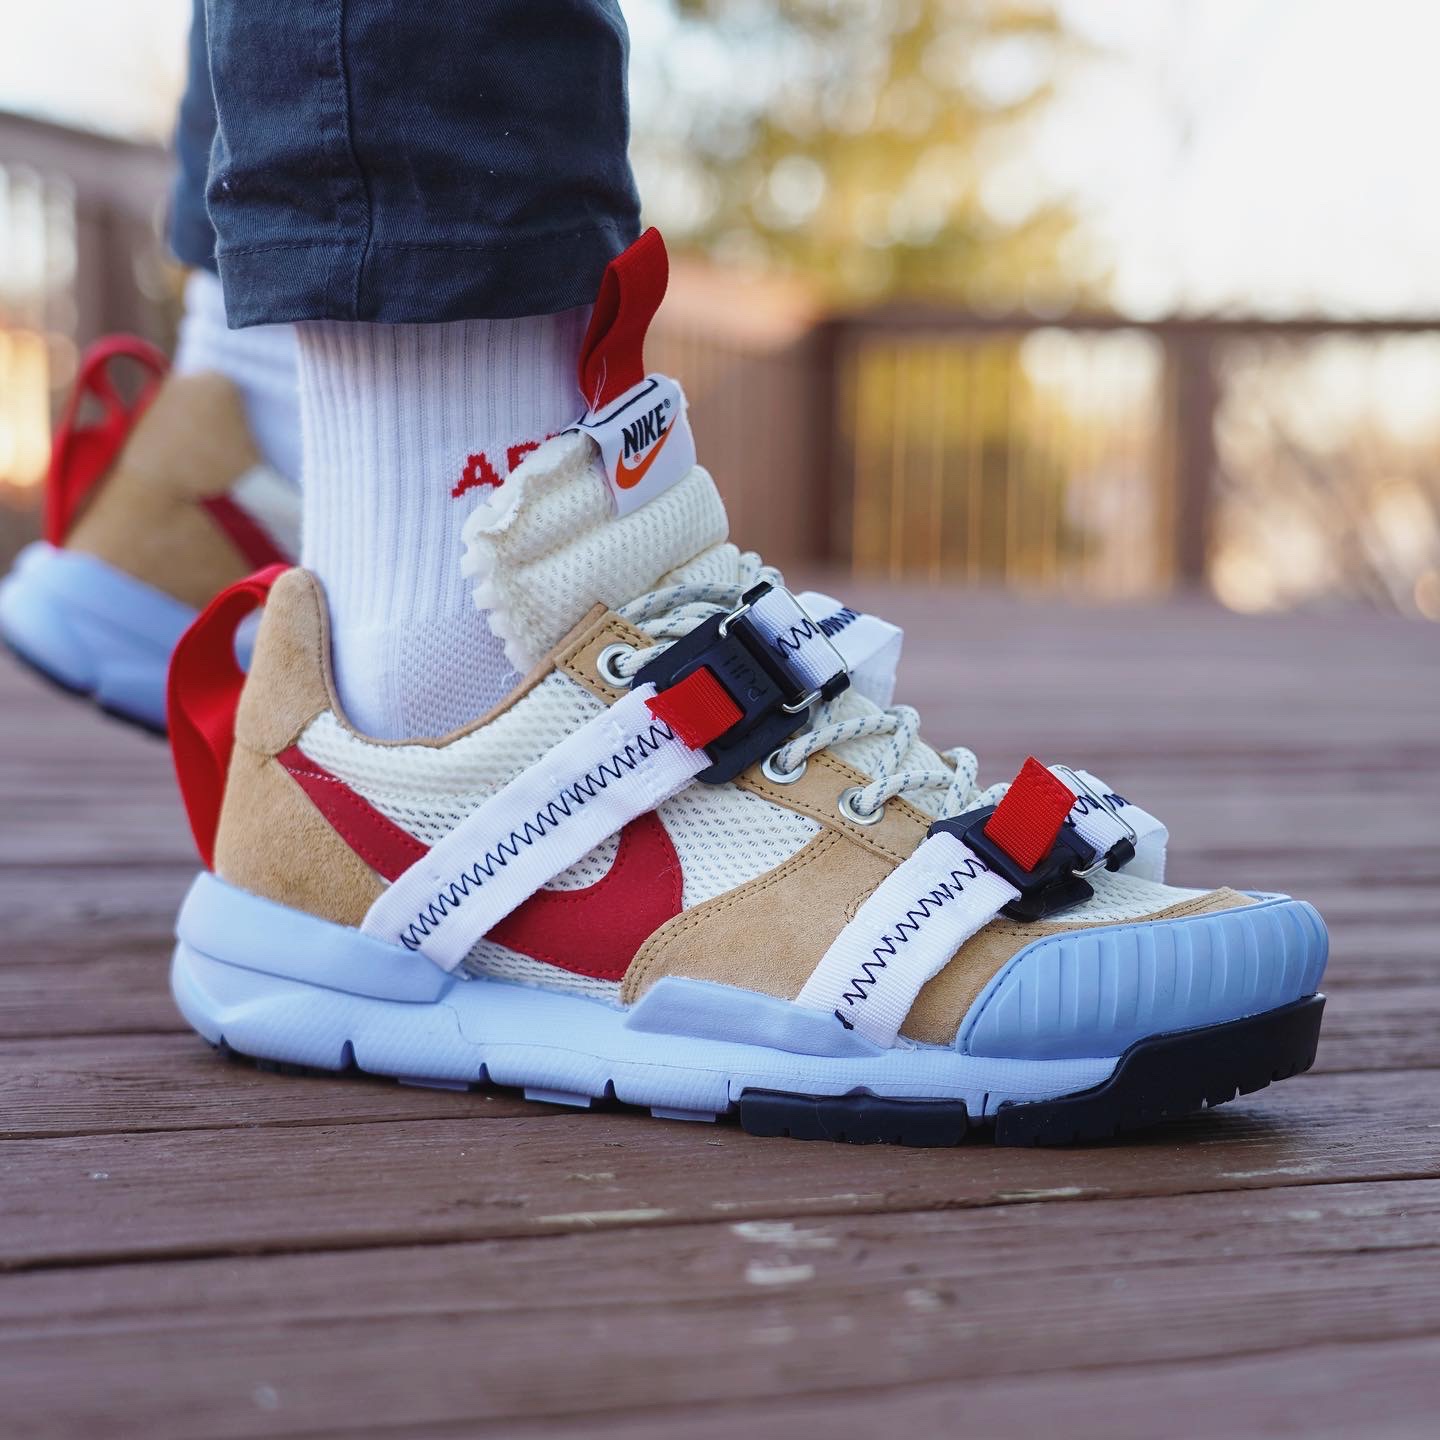 Aap Een evenement rietje Seth Fowler on Twitter: "Not the first, but I'm still proud of myself for  goin for it. The Tom Sachs x @Nike Mars Yard Overshoe / Mars Yard 2.1  https://t.co/4s0tRHuKAE" / X